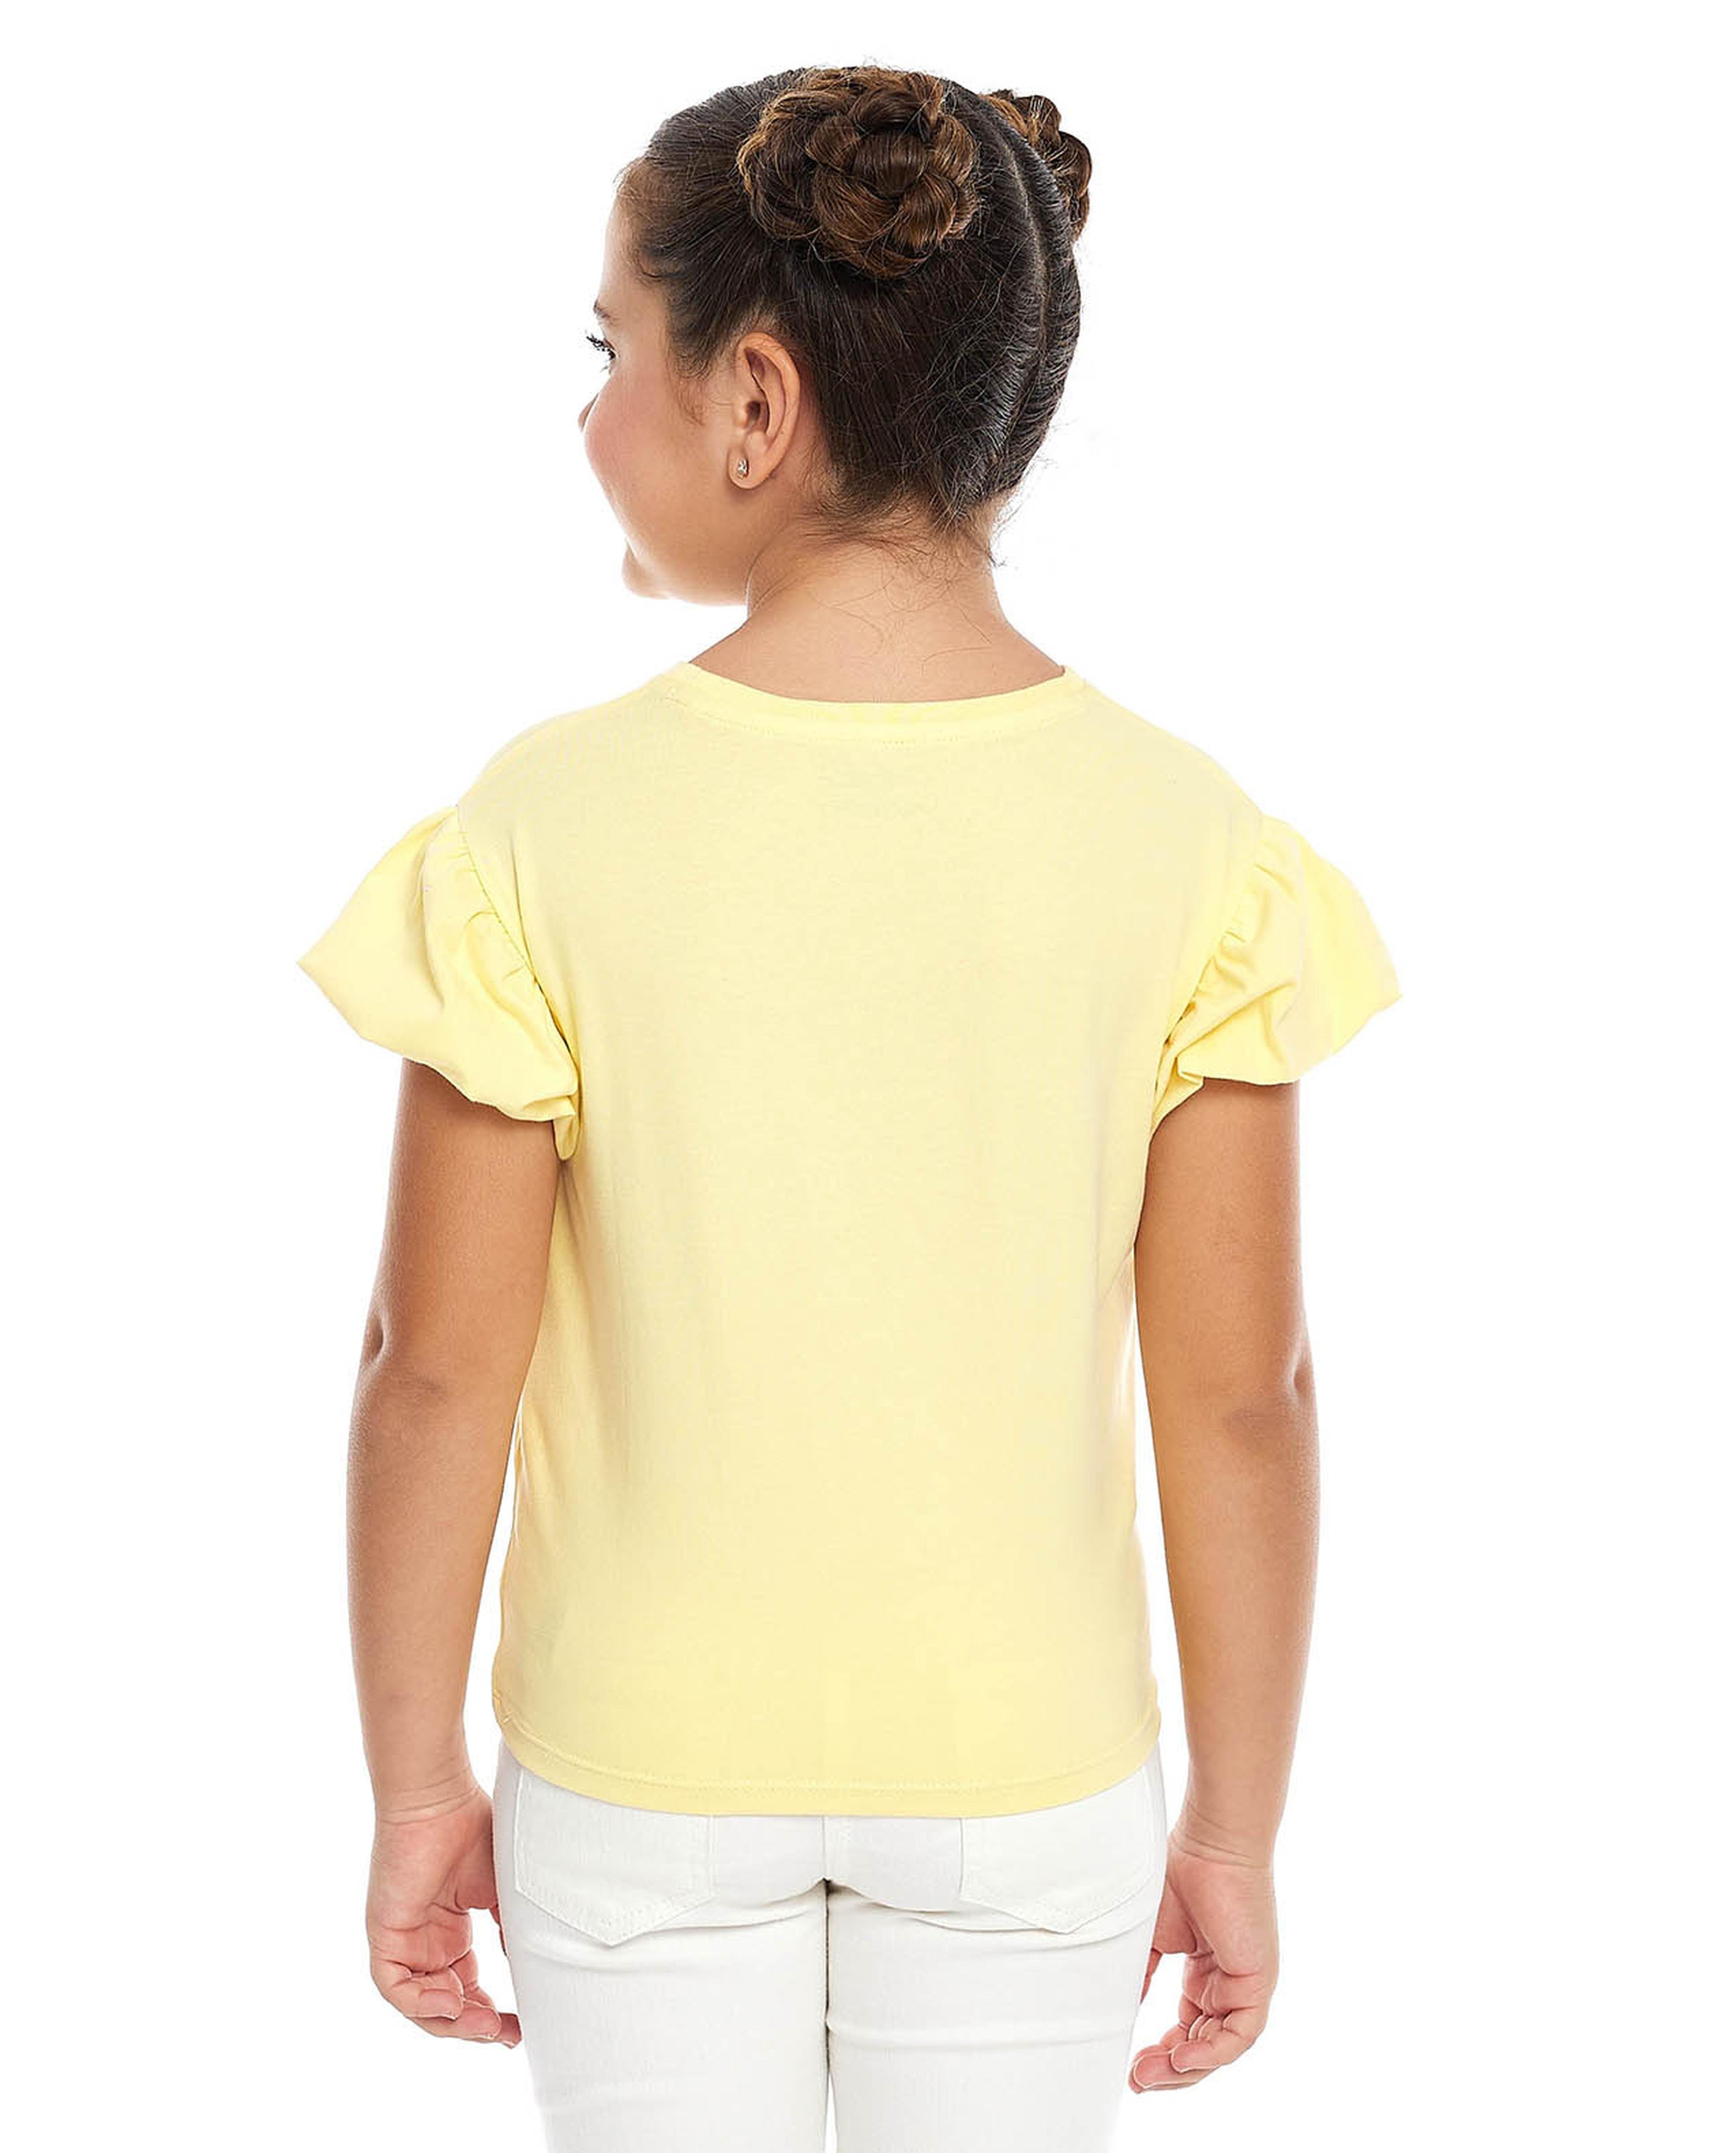 3D Applique Top with Crew Neck and Puff Sleeves